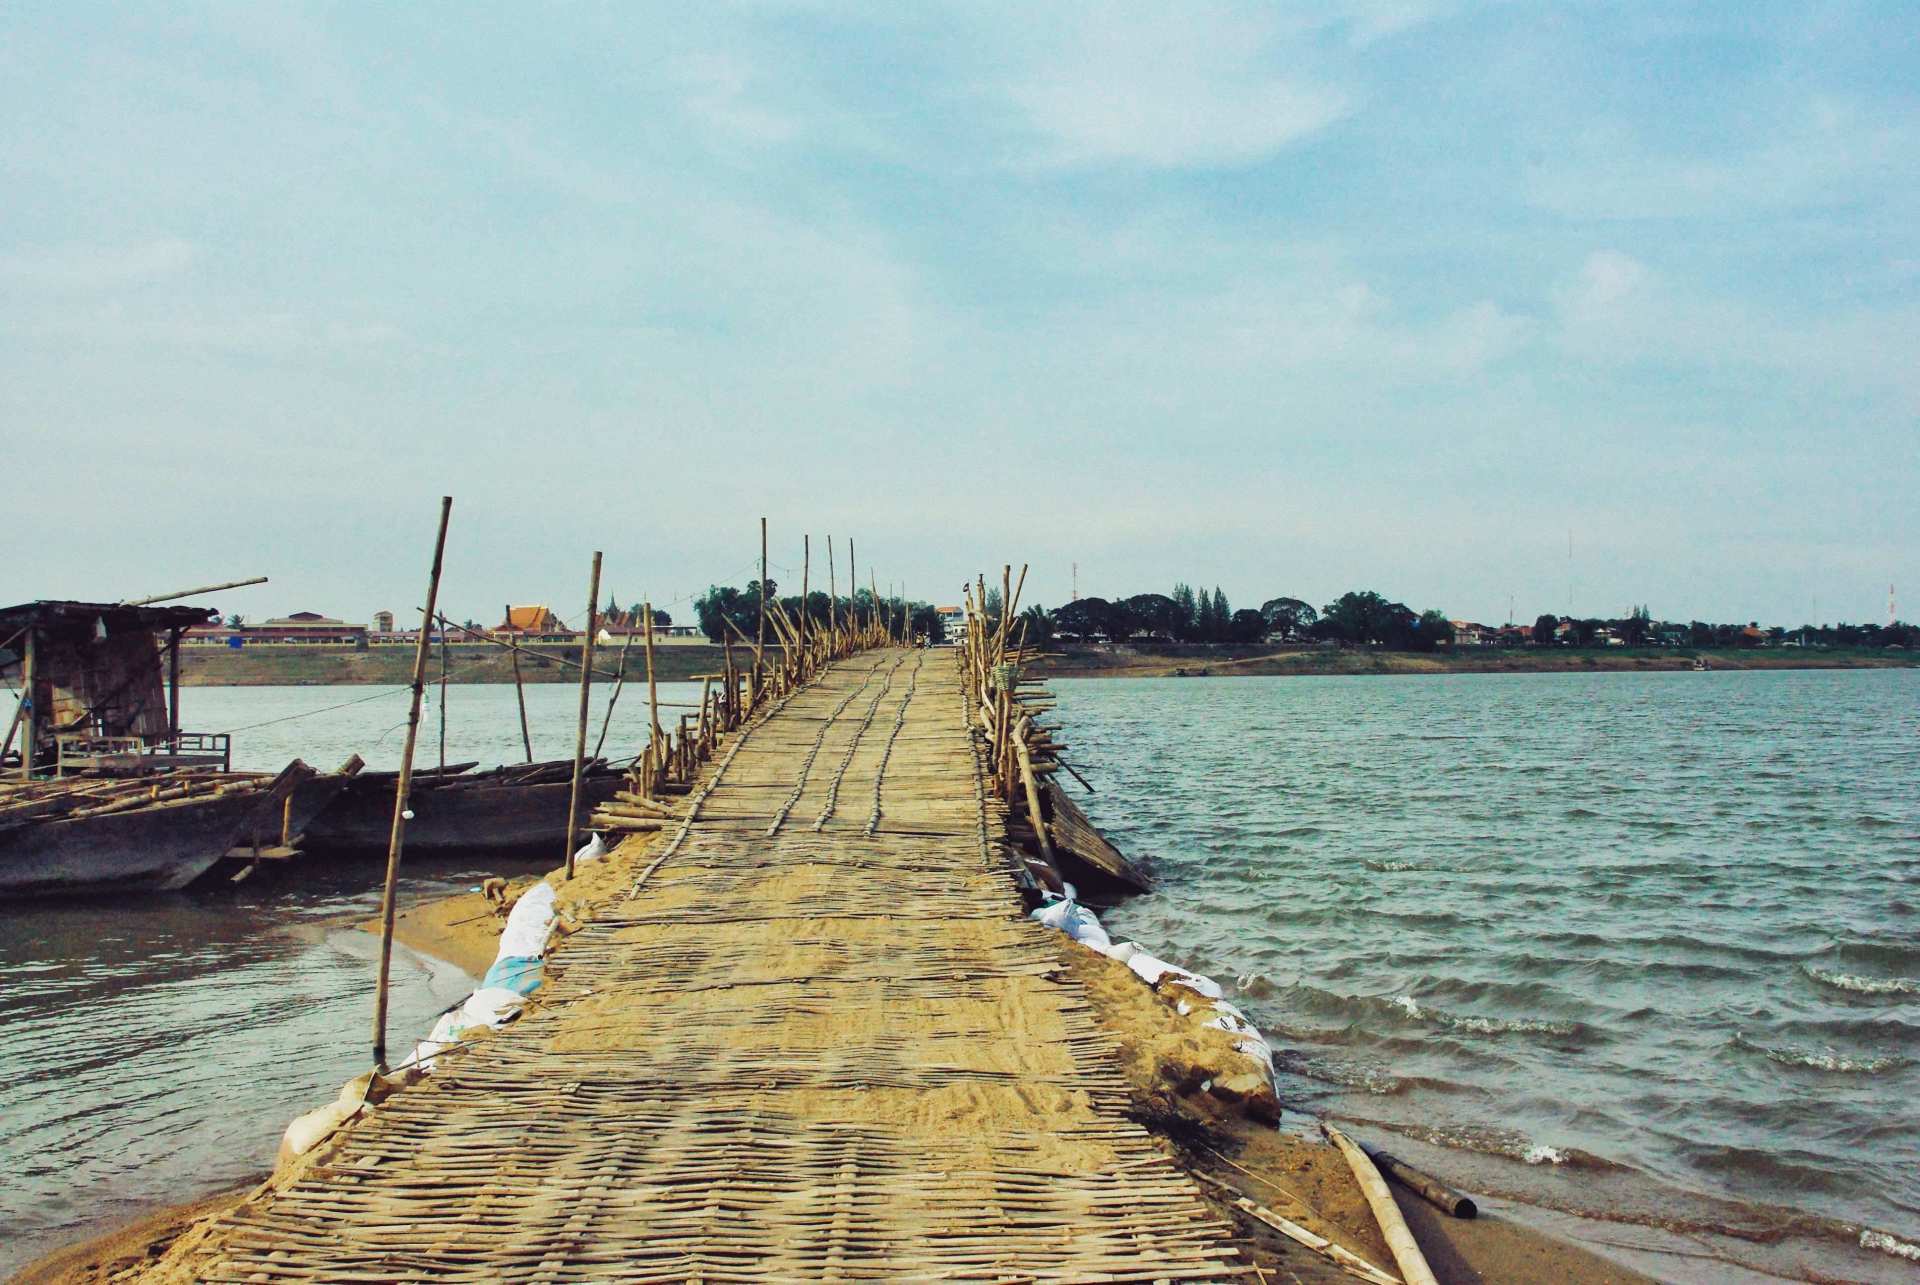 The very wobbly bamboo bridge in Kampong Cham